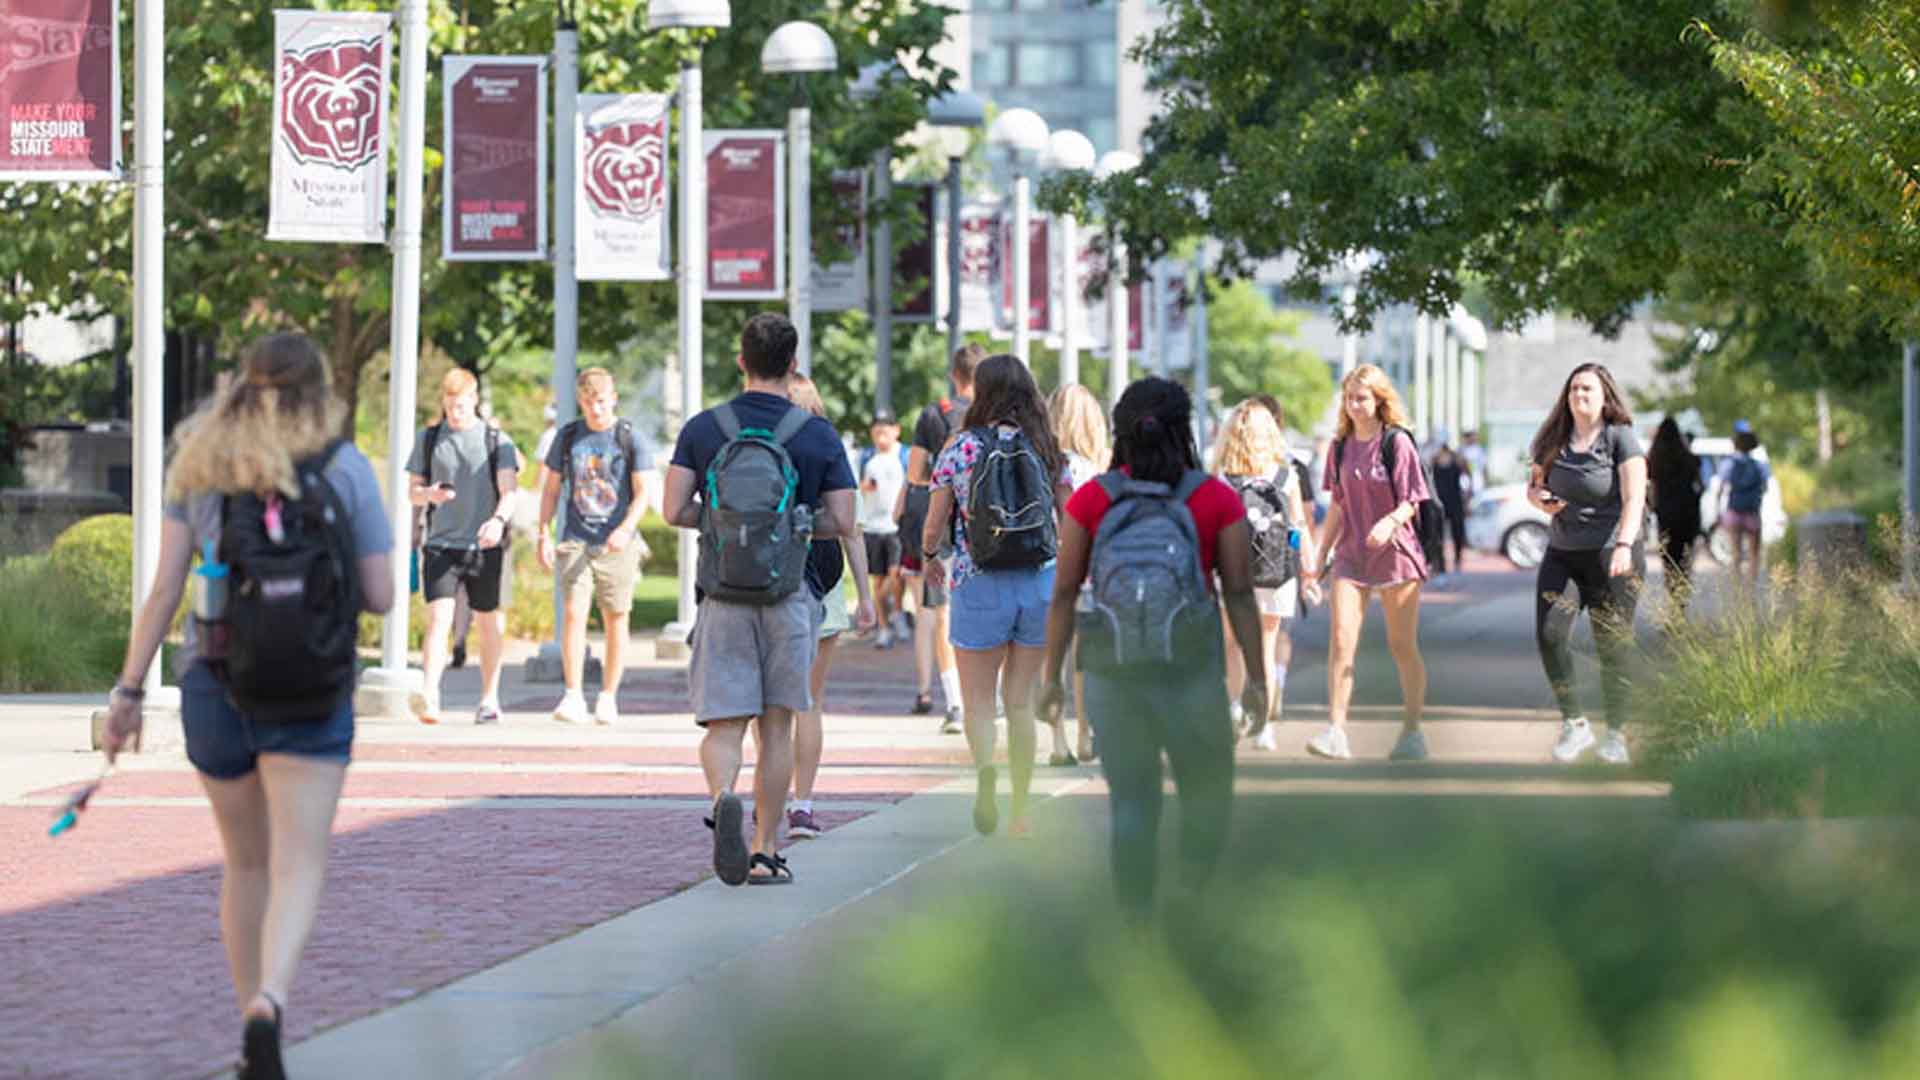 Students walking on a safe university campus